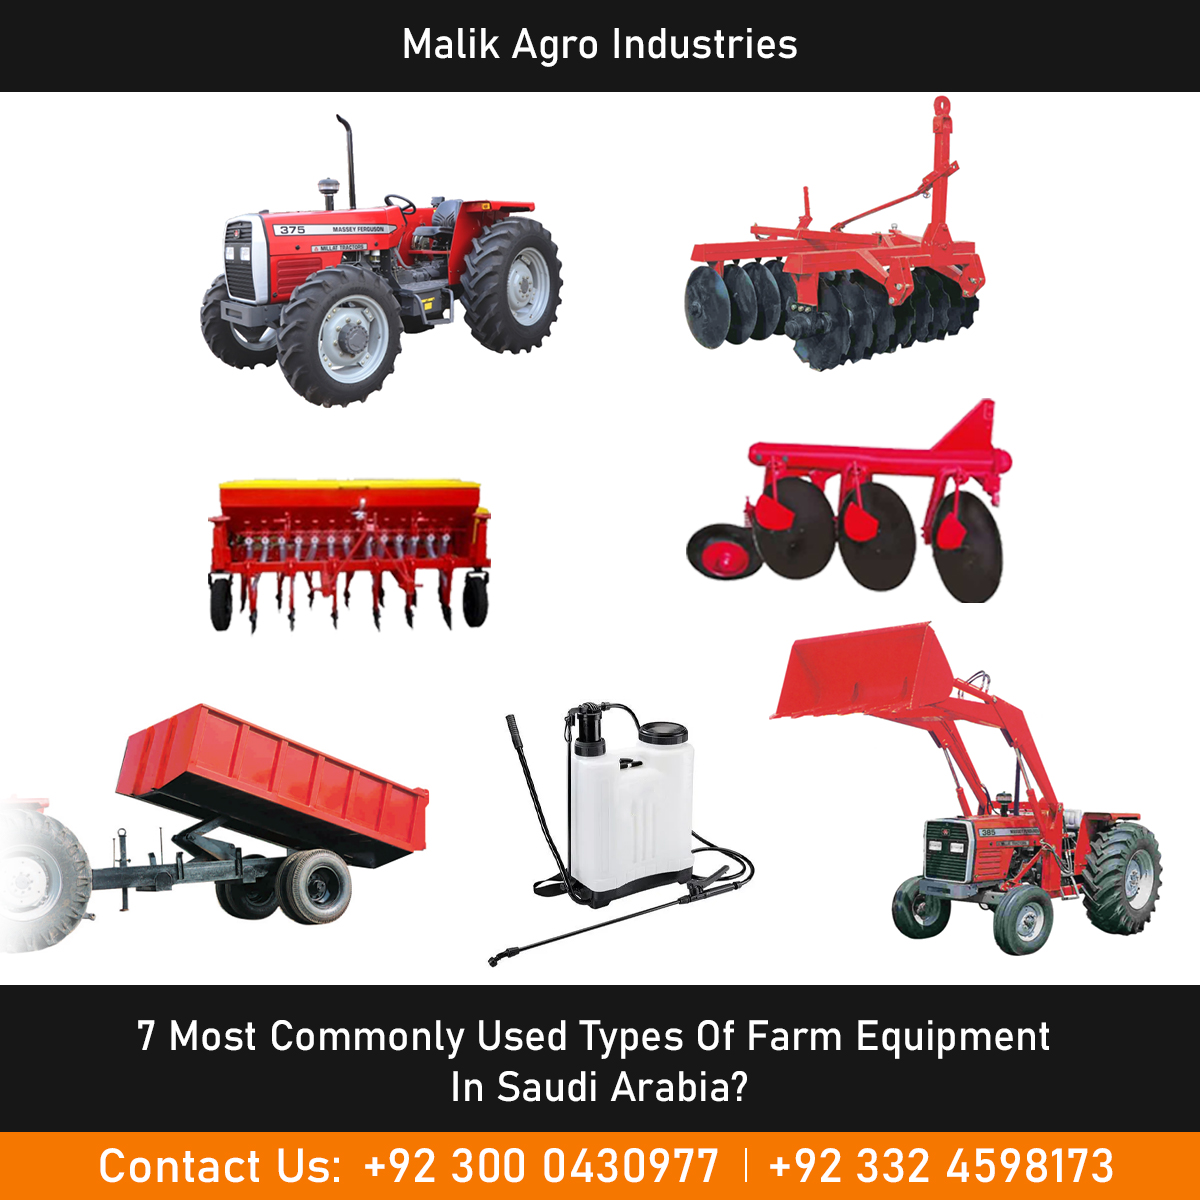 Are you looking for high-quality farm equipment in Saudi Arabia? Discover the commonly used types of farm equipment offered by Malik Agro Industries. From tractors to harvesters, irrigation systems to livestock handling equipment, find out how these tools can enhance your agricultural operations.